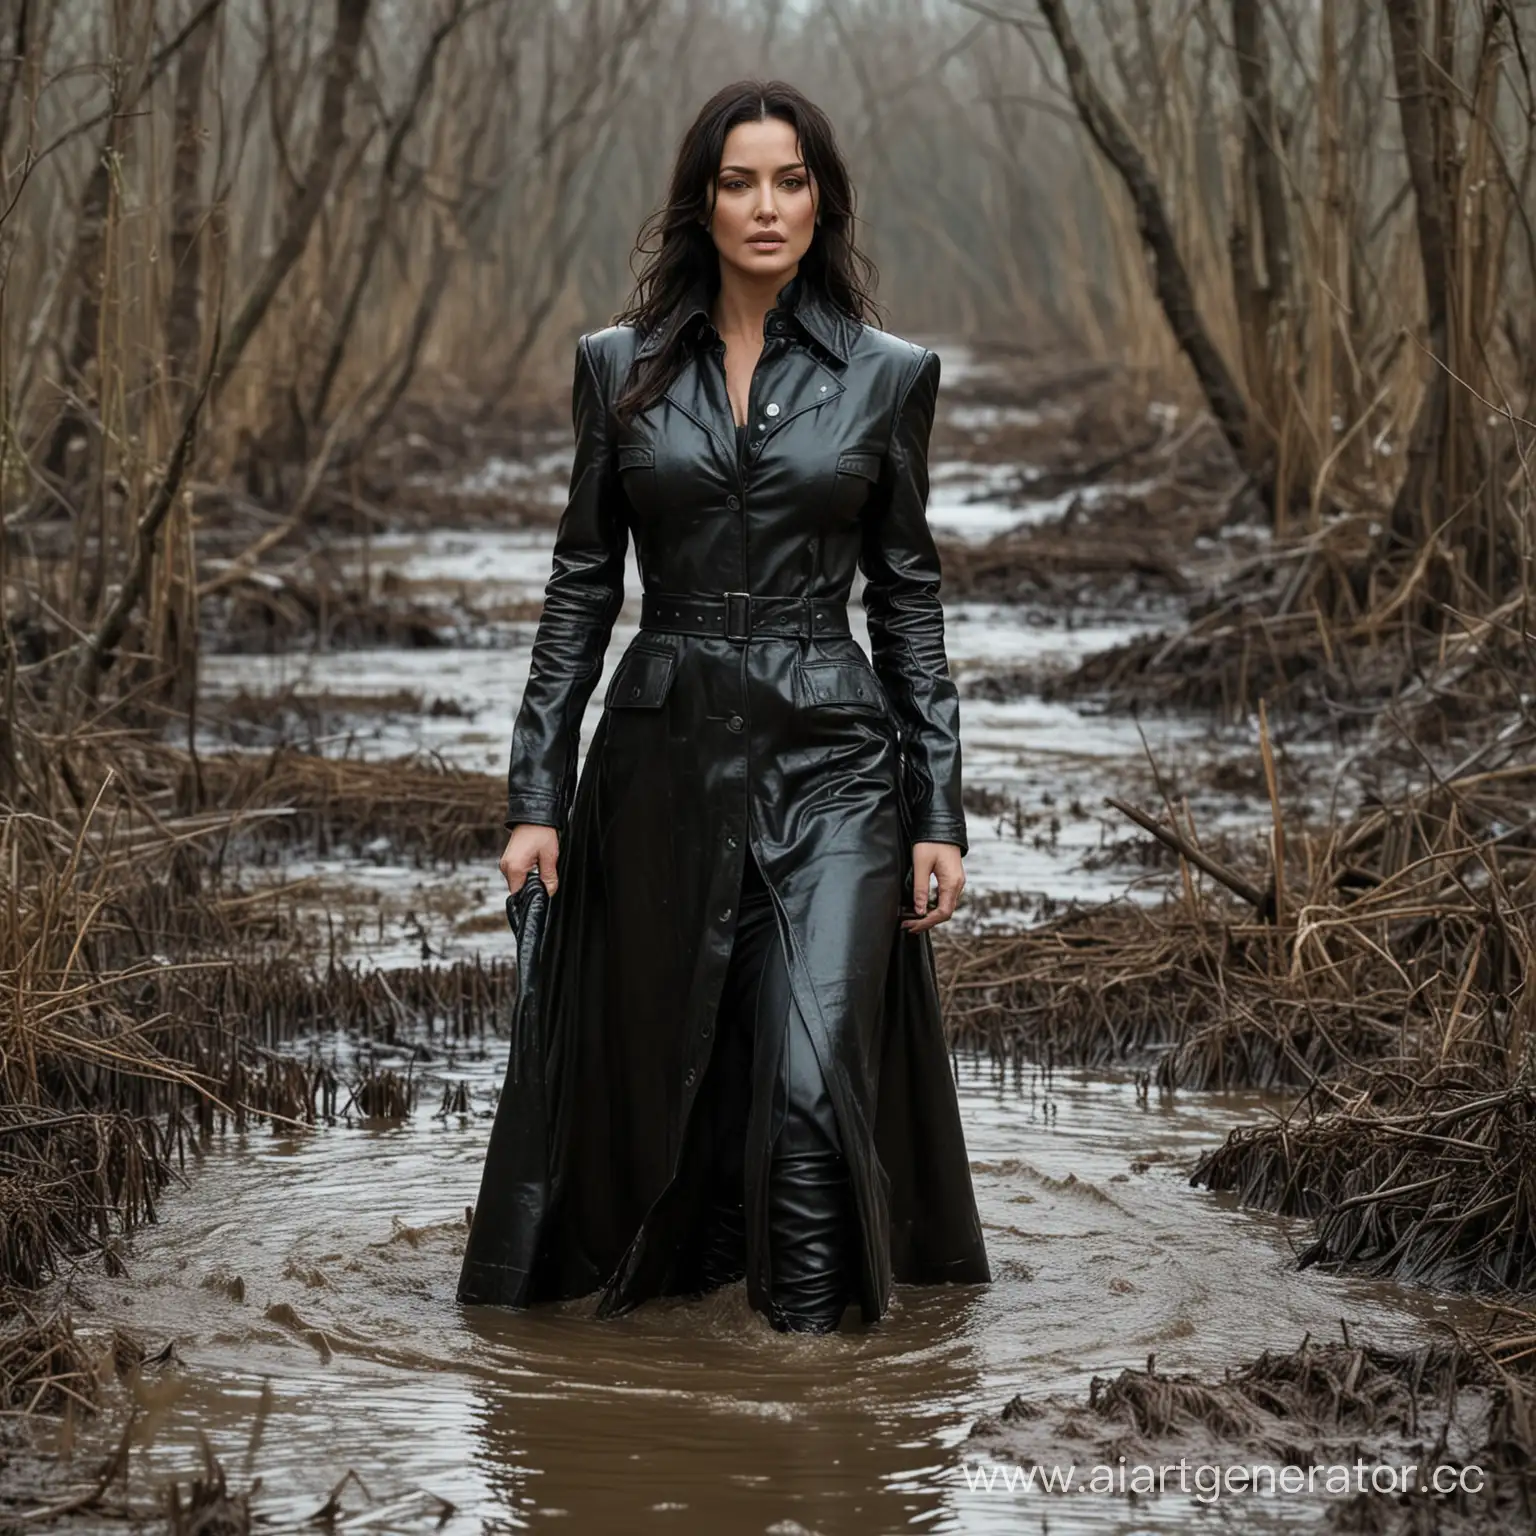 Monica-Bellucci-Struggles-in-Muddy-Swamp-wearing-a-Long-Leather-Coat